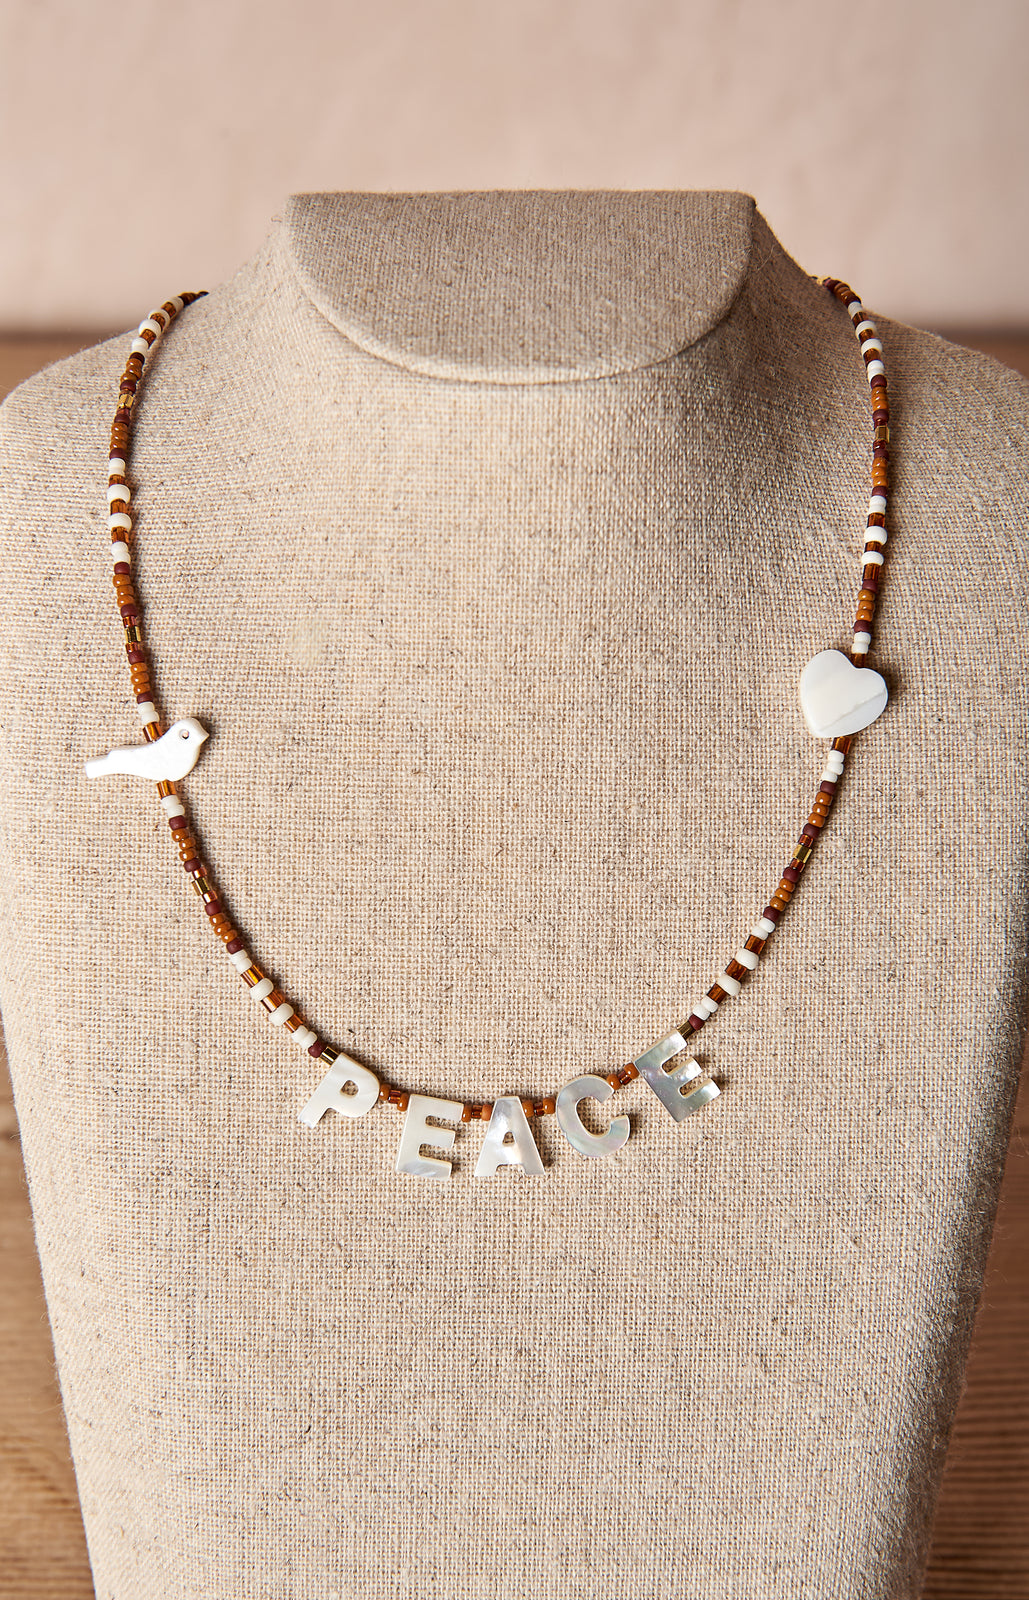 PEACE Beaded Necklace